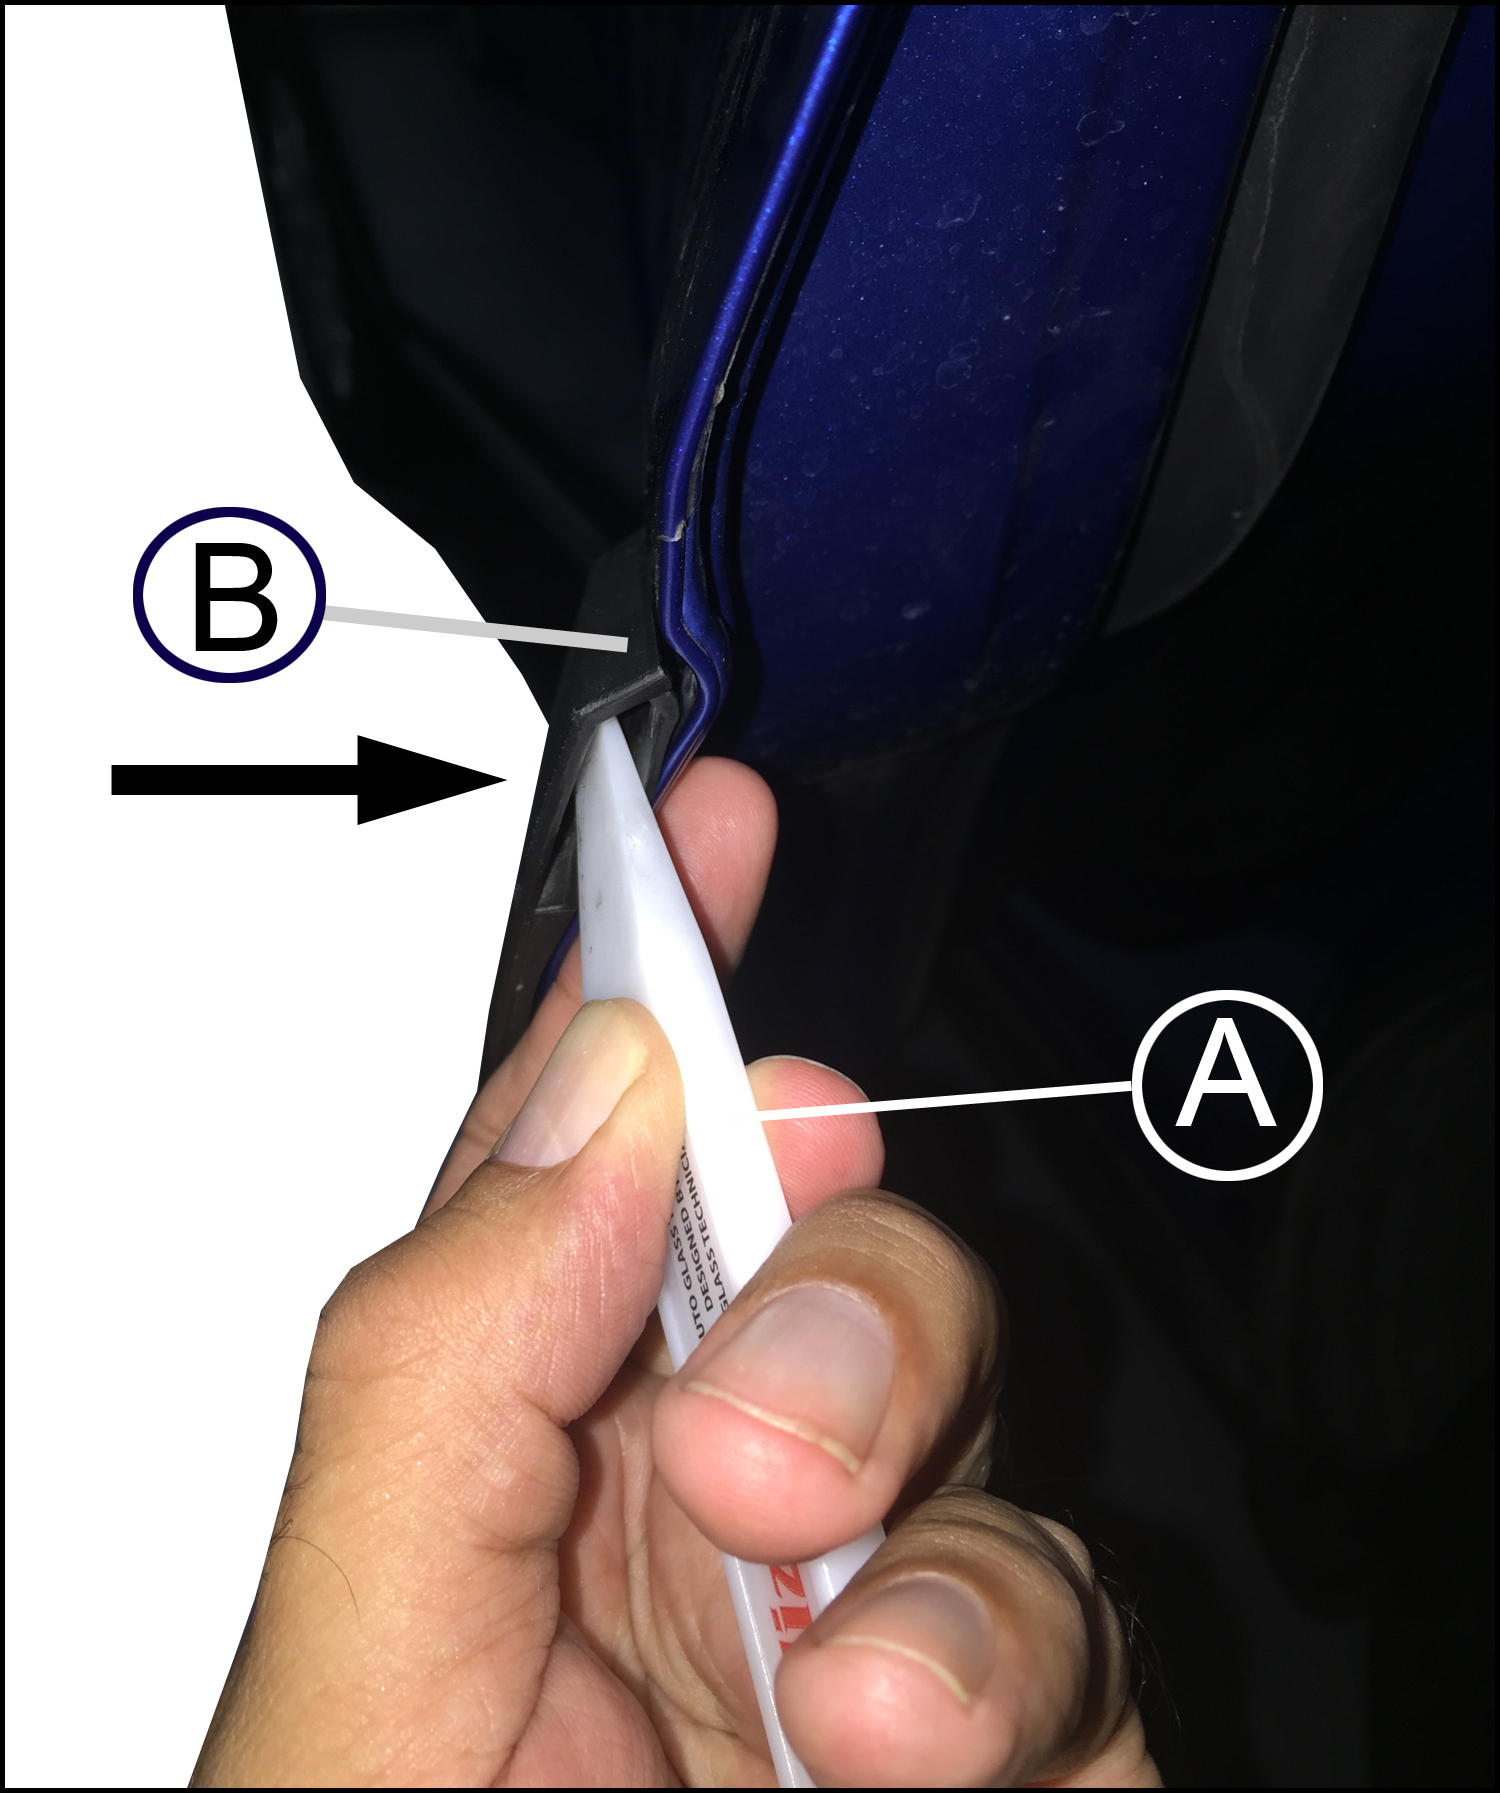  plastic trim and molding tool or equivalent (A) hollow part of the garnish (B)